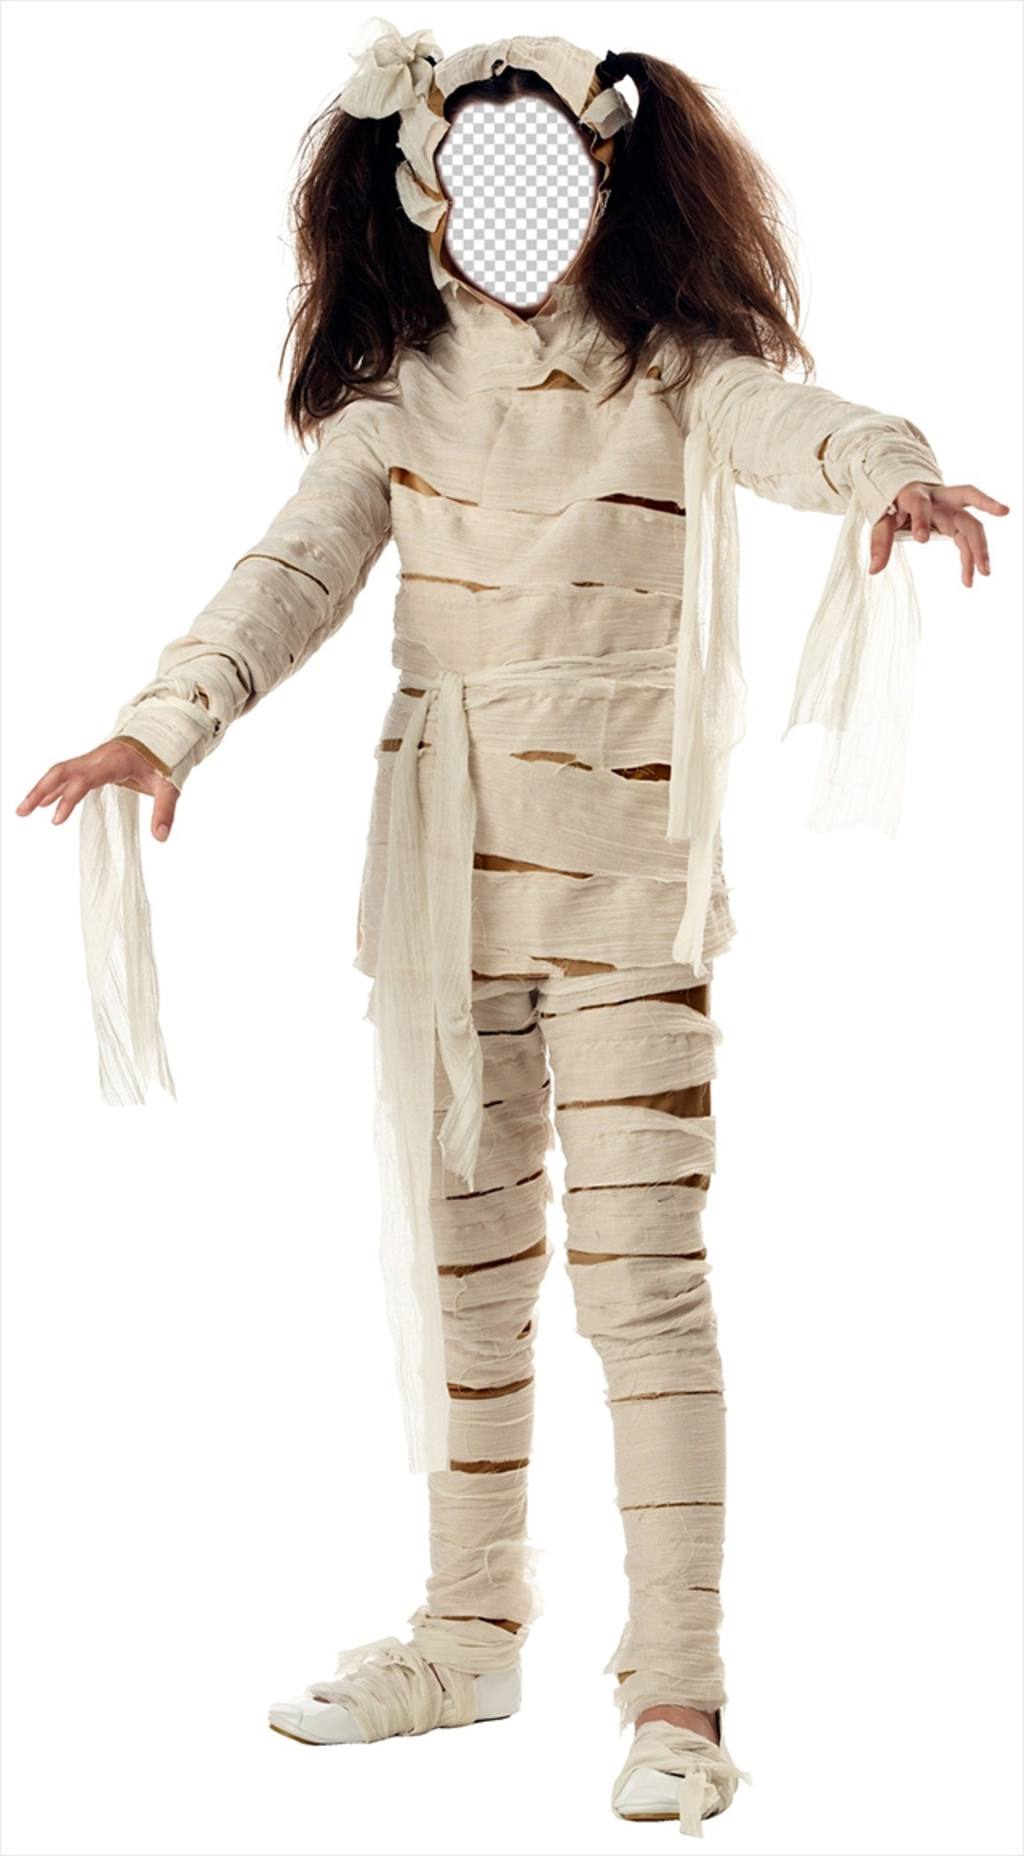 Photomontage of a girl disguised as a mummy for Halloween that you can edit ..